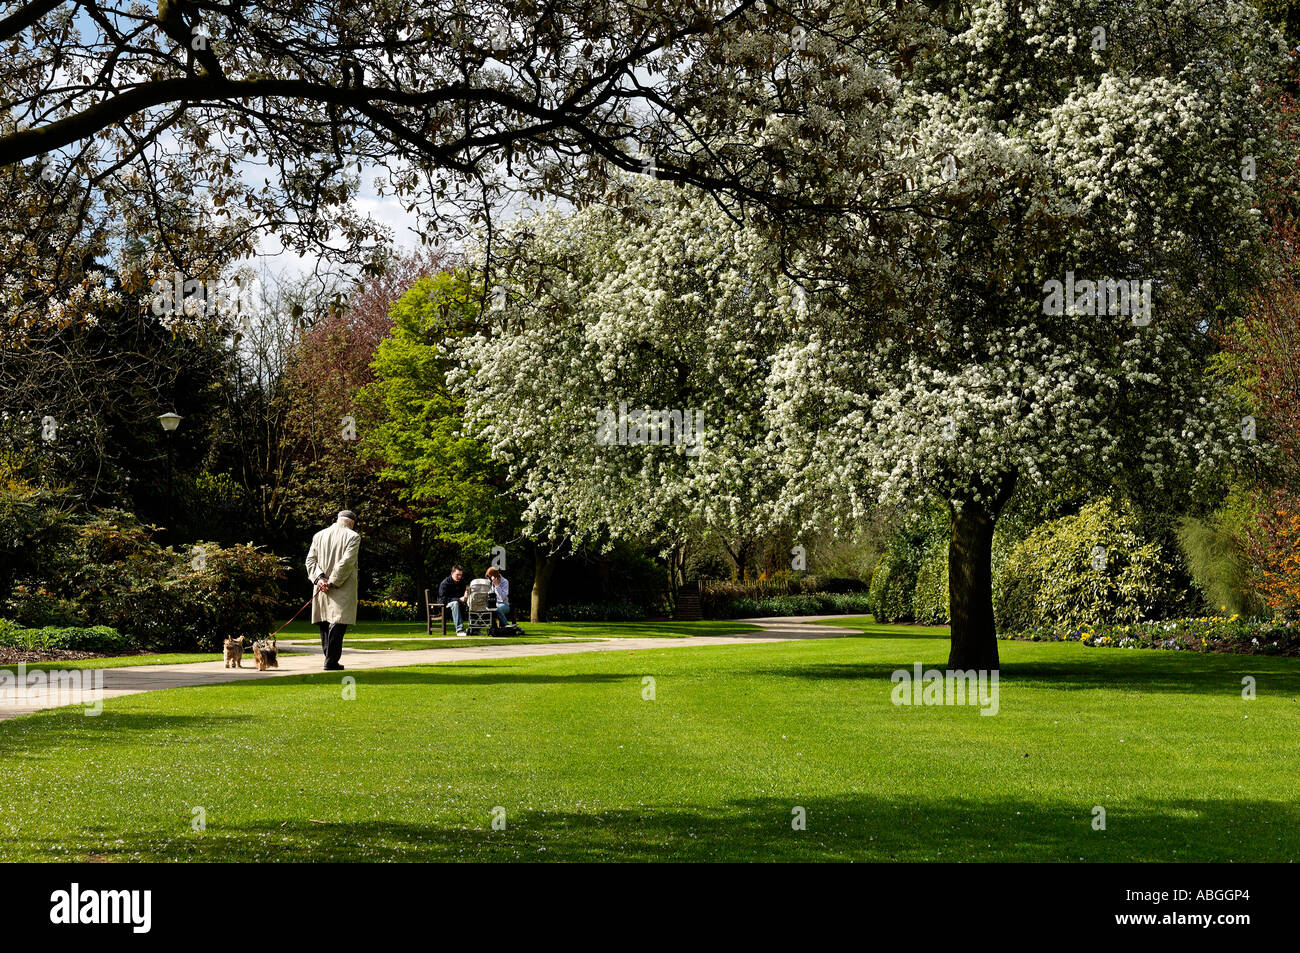 'Ages of man' in the park at spring-time Stock Photo